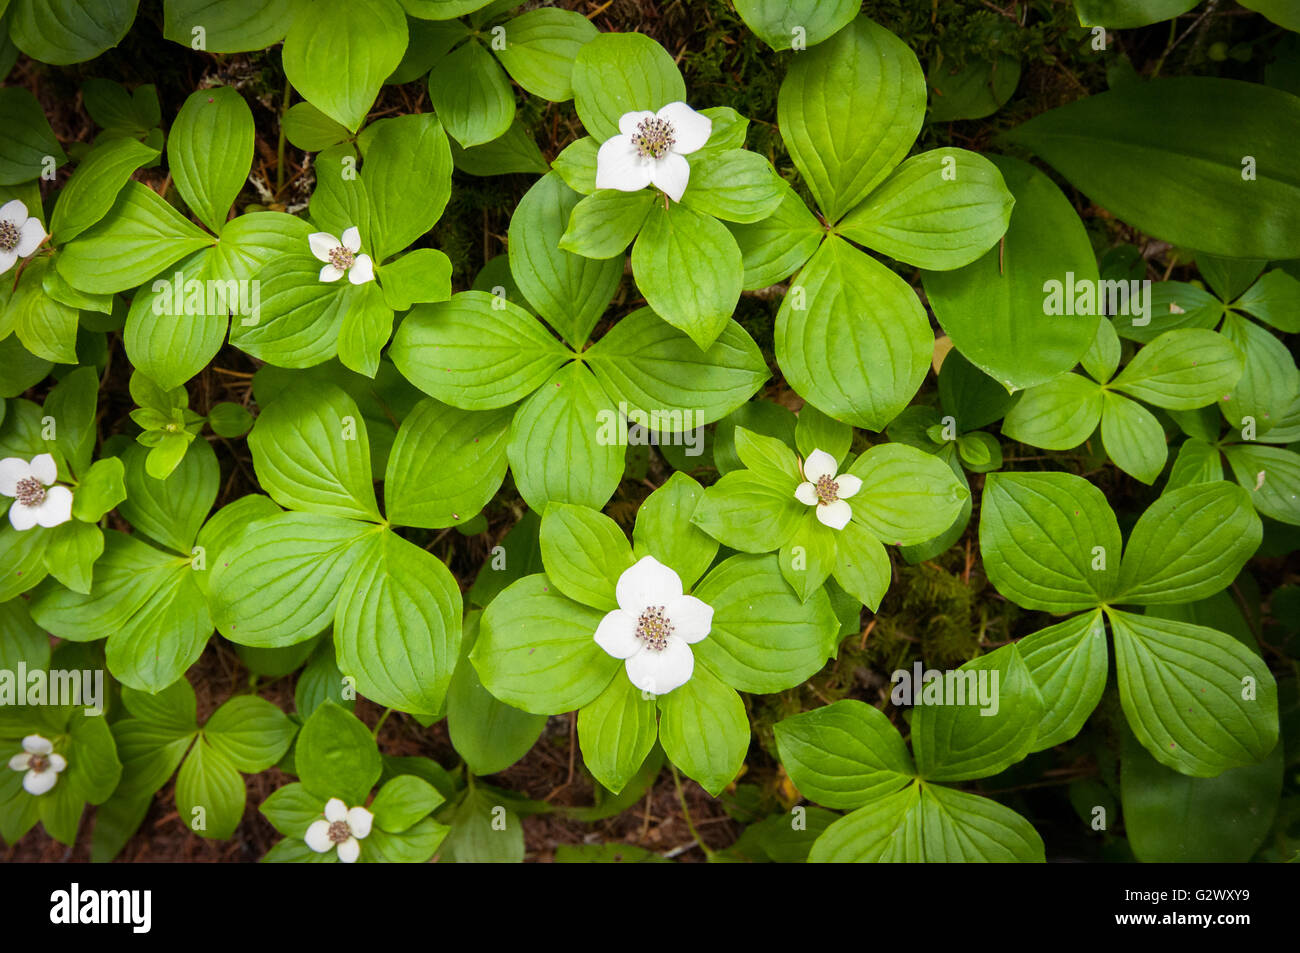 A cluster of Bunchberry (Cornus canadensis) at the base of a fir tree. Washington, United States. Stock Photo